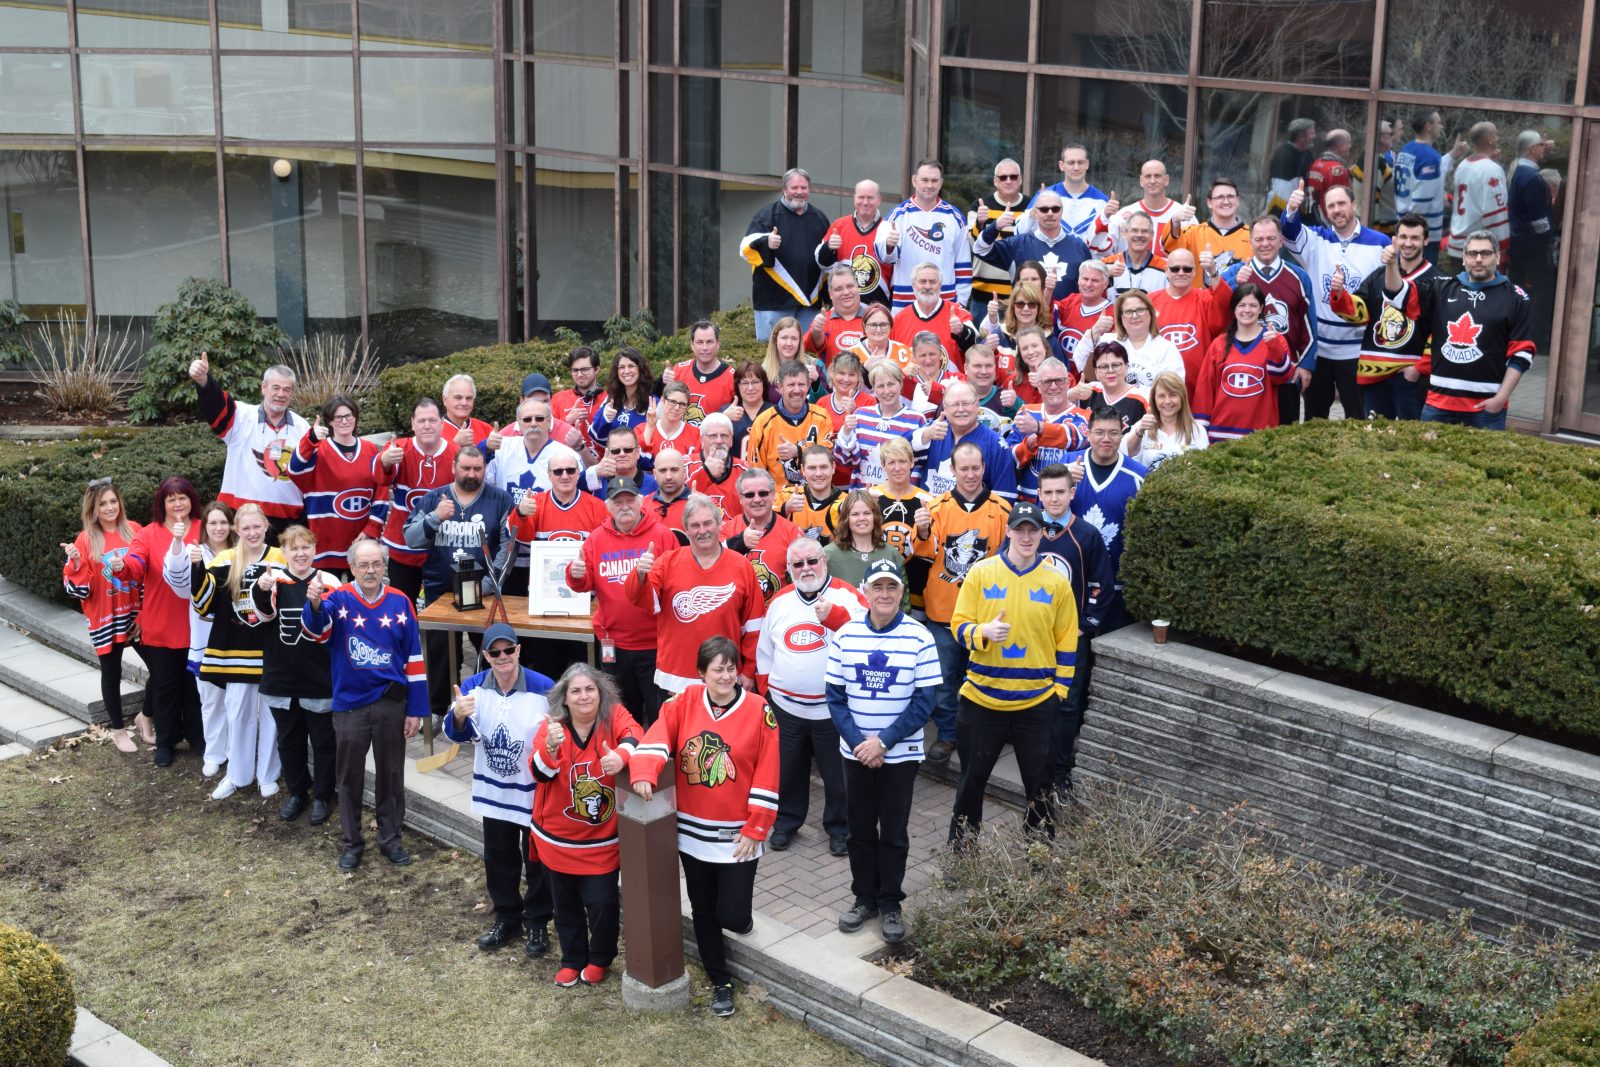 Cornwall region honours Humboldt on Jersey Day